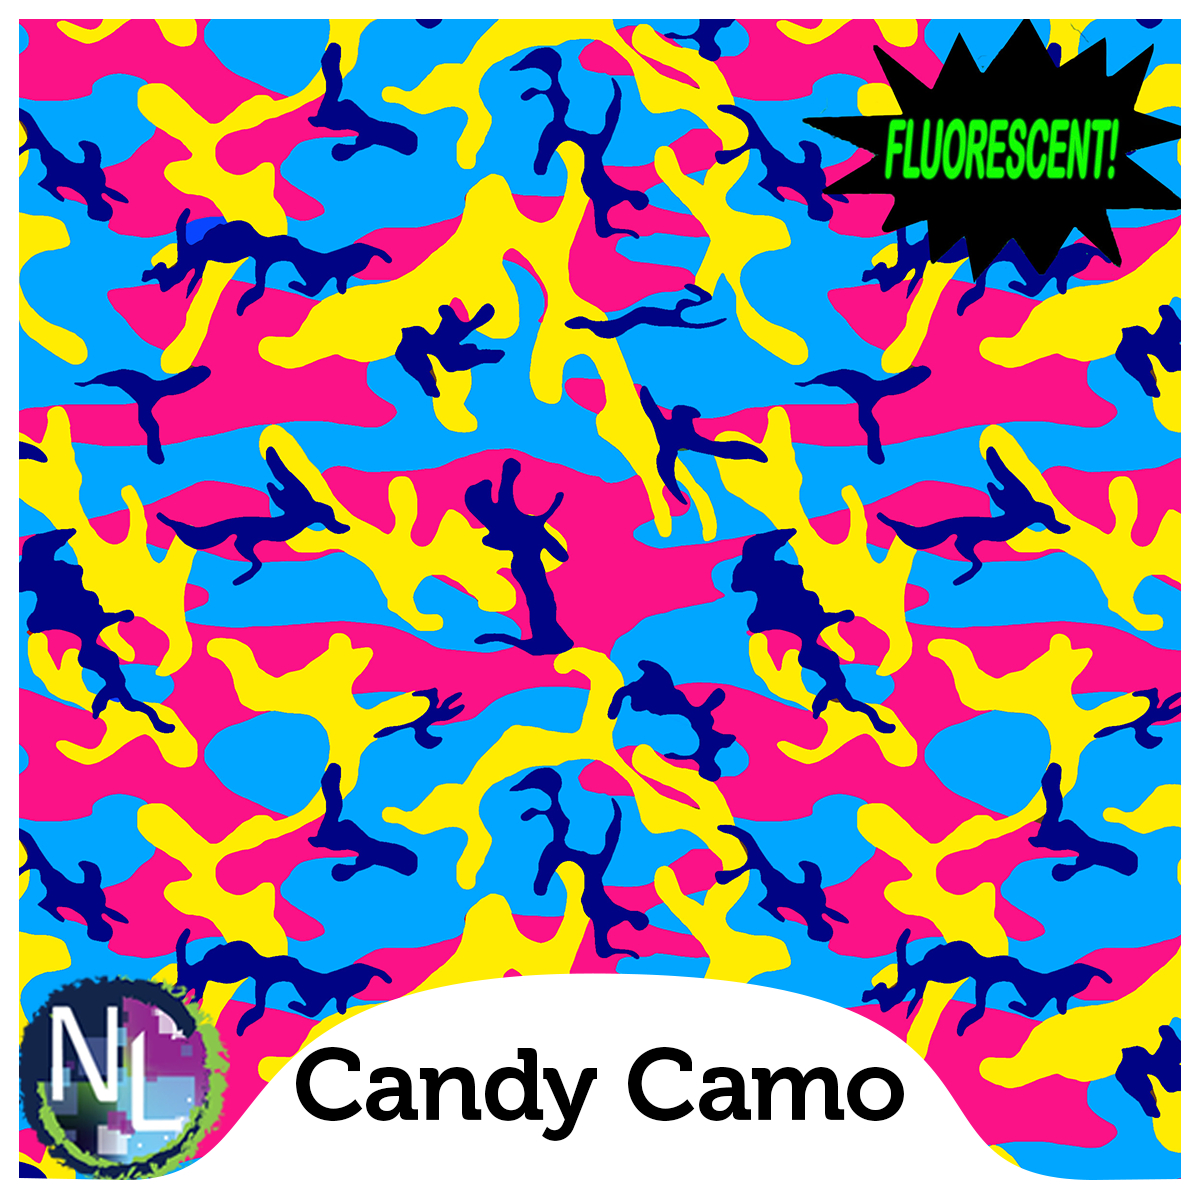 Candy Camo ( FLUORESCENT INK )